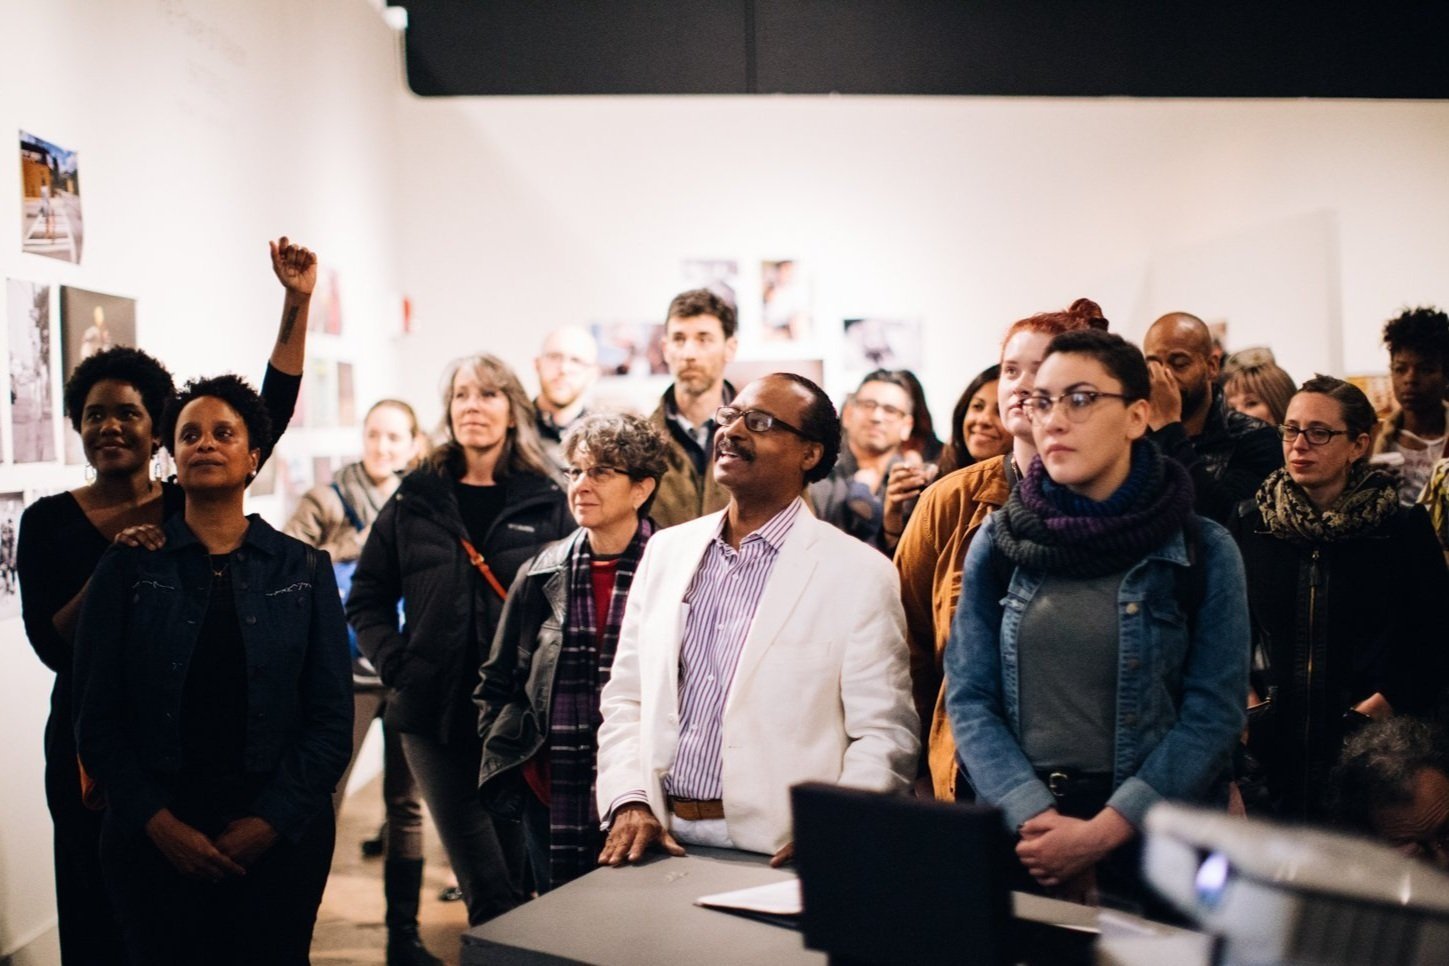  Crowd of people in an art gallery 